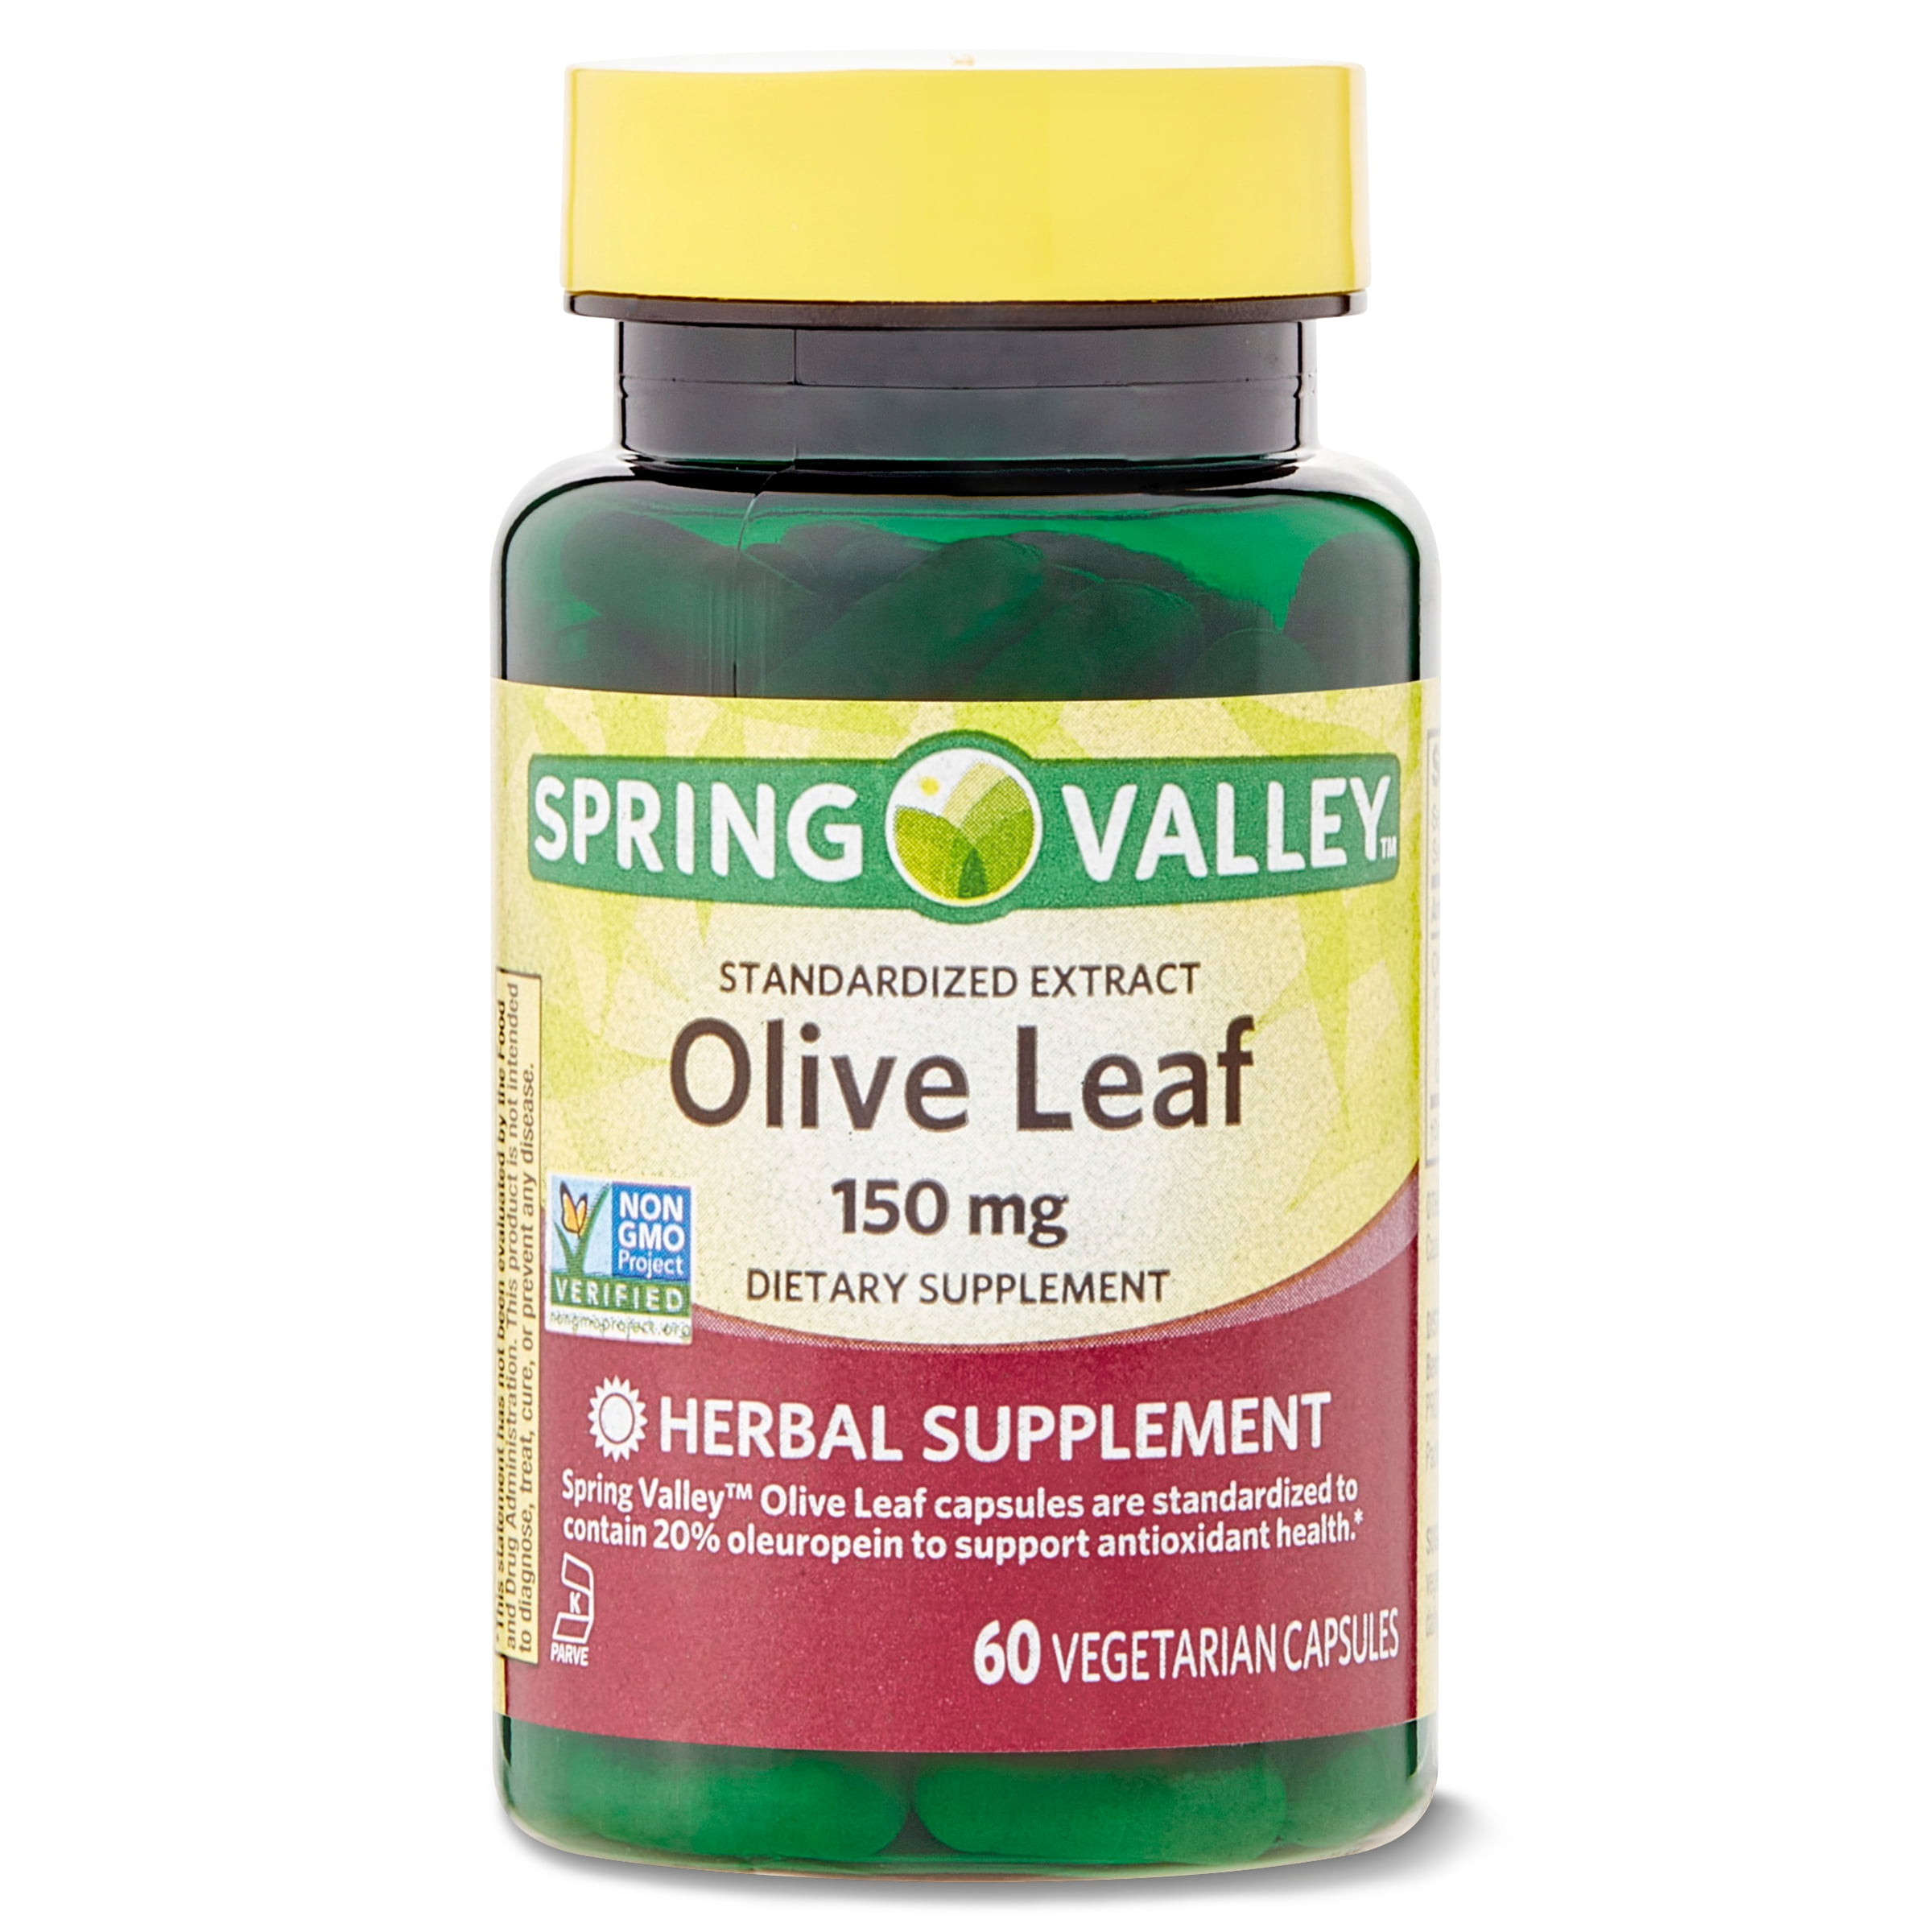 Leaf, Extract Capsules Valley Olive Count Dietary 150 mg, Spring Standardized 60 Supplement,